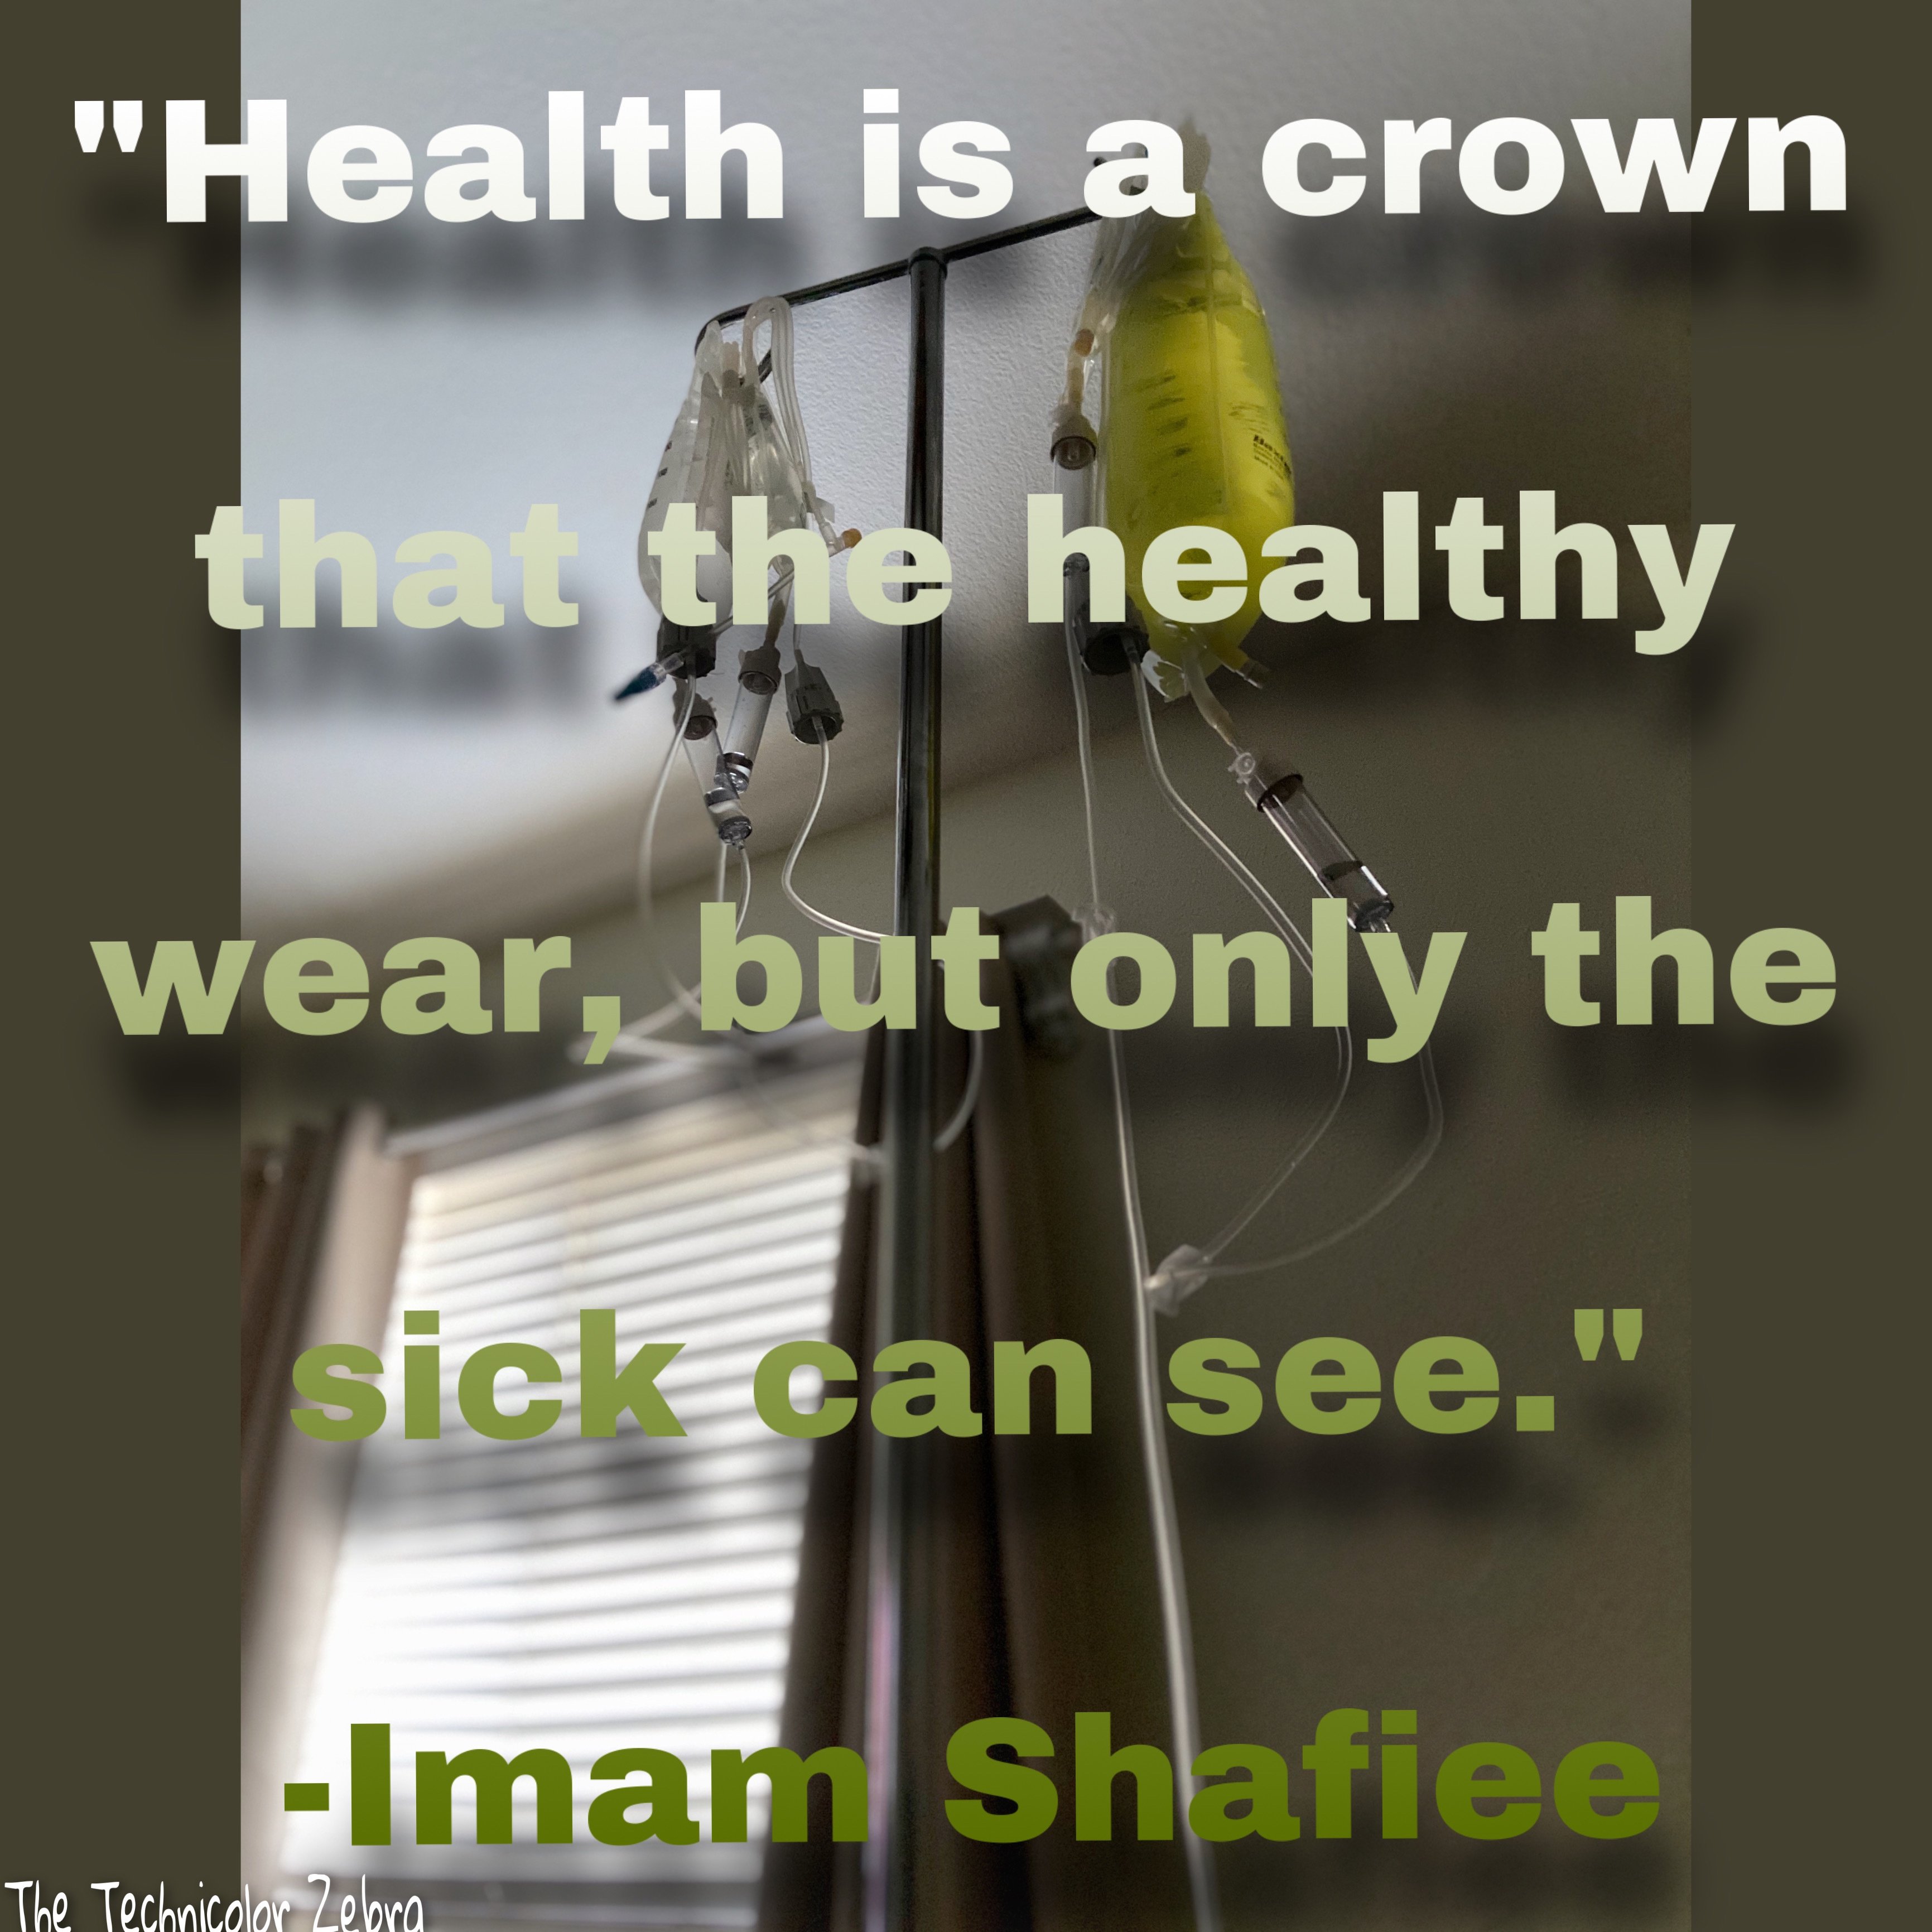 An image of IV fluids running with words overlaid saying "Health is a crown that the healthy wear, but only the sick can see. - Imam Shaifee"